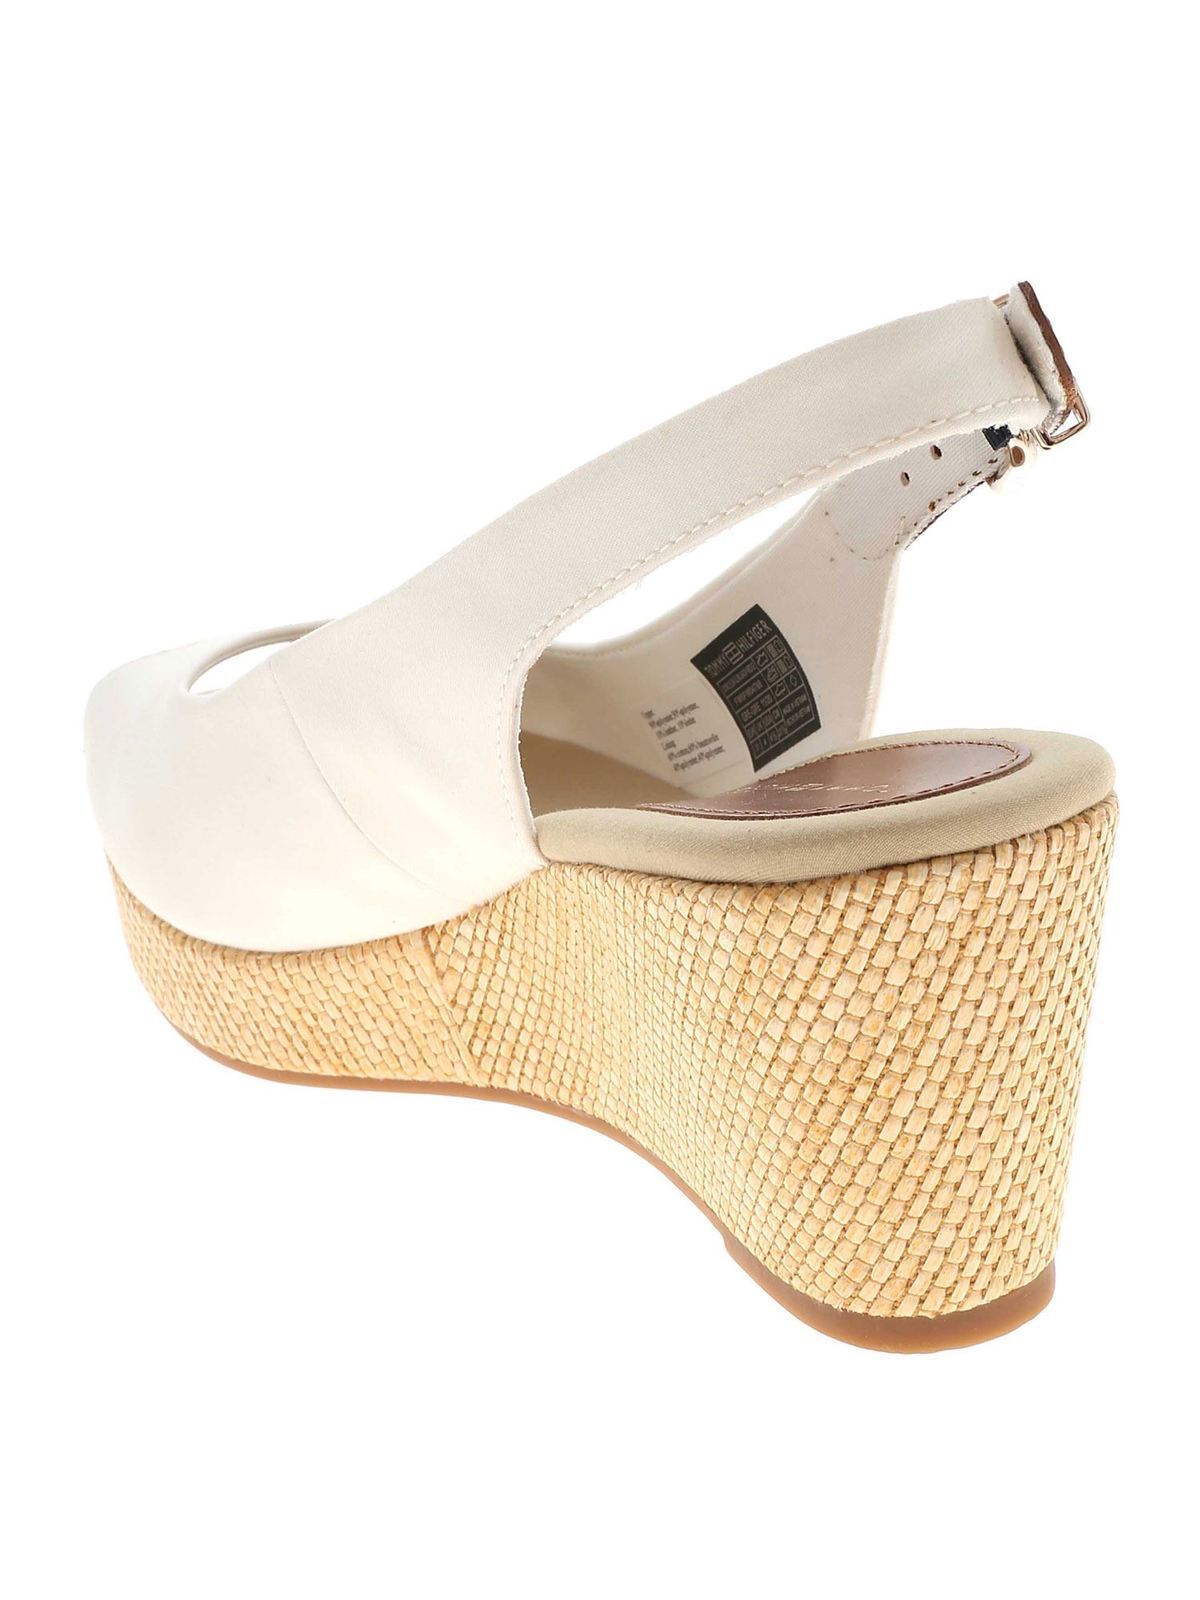 tommy hilfiger wedges white